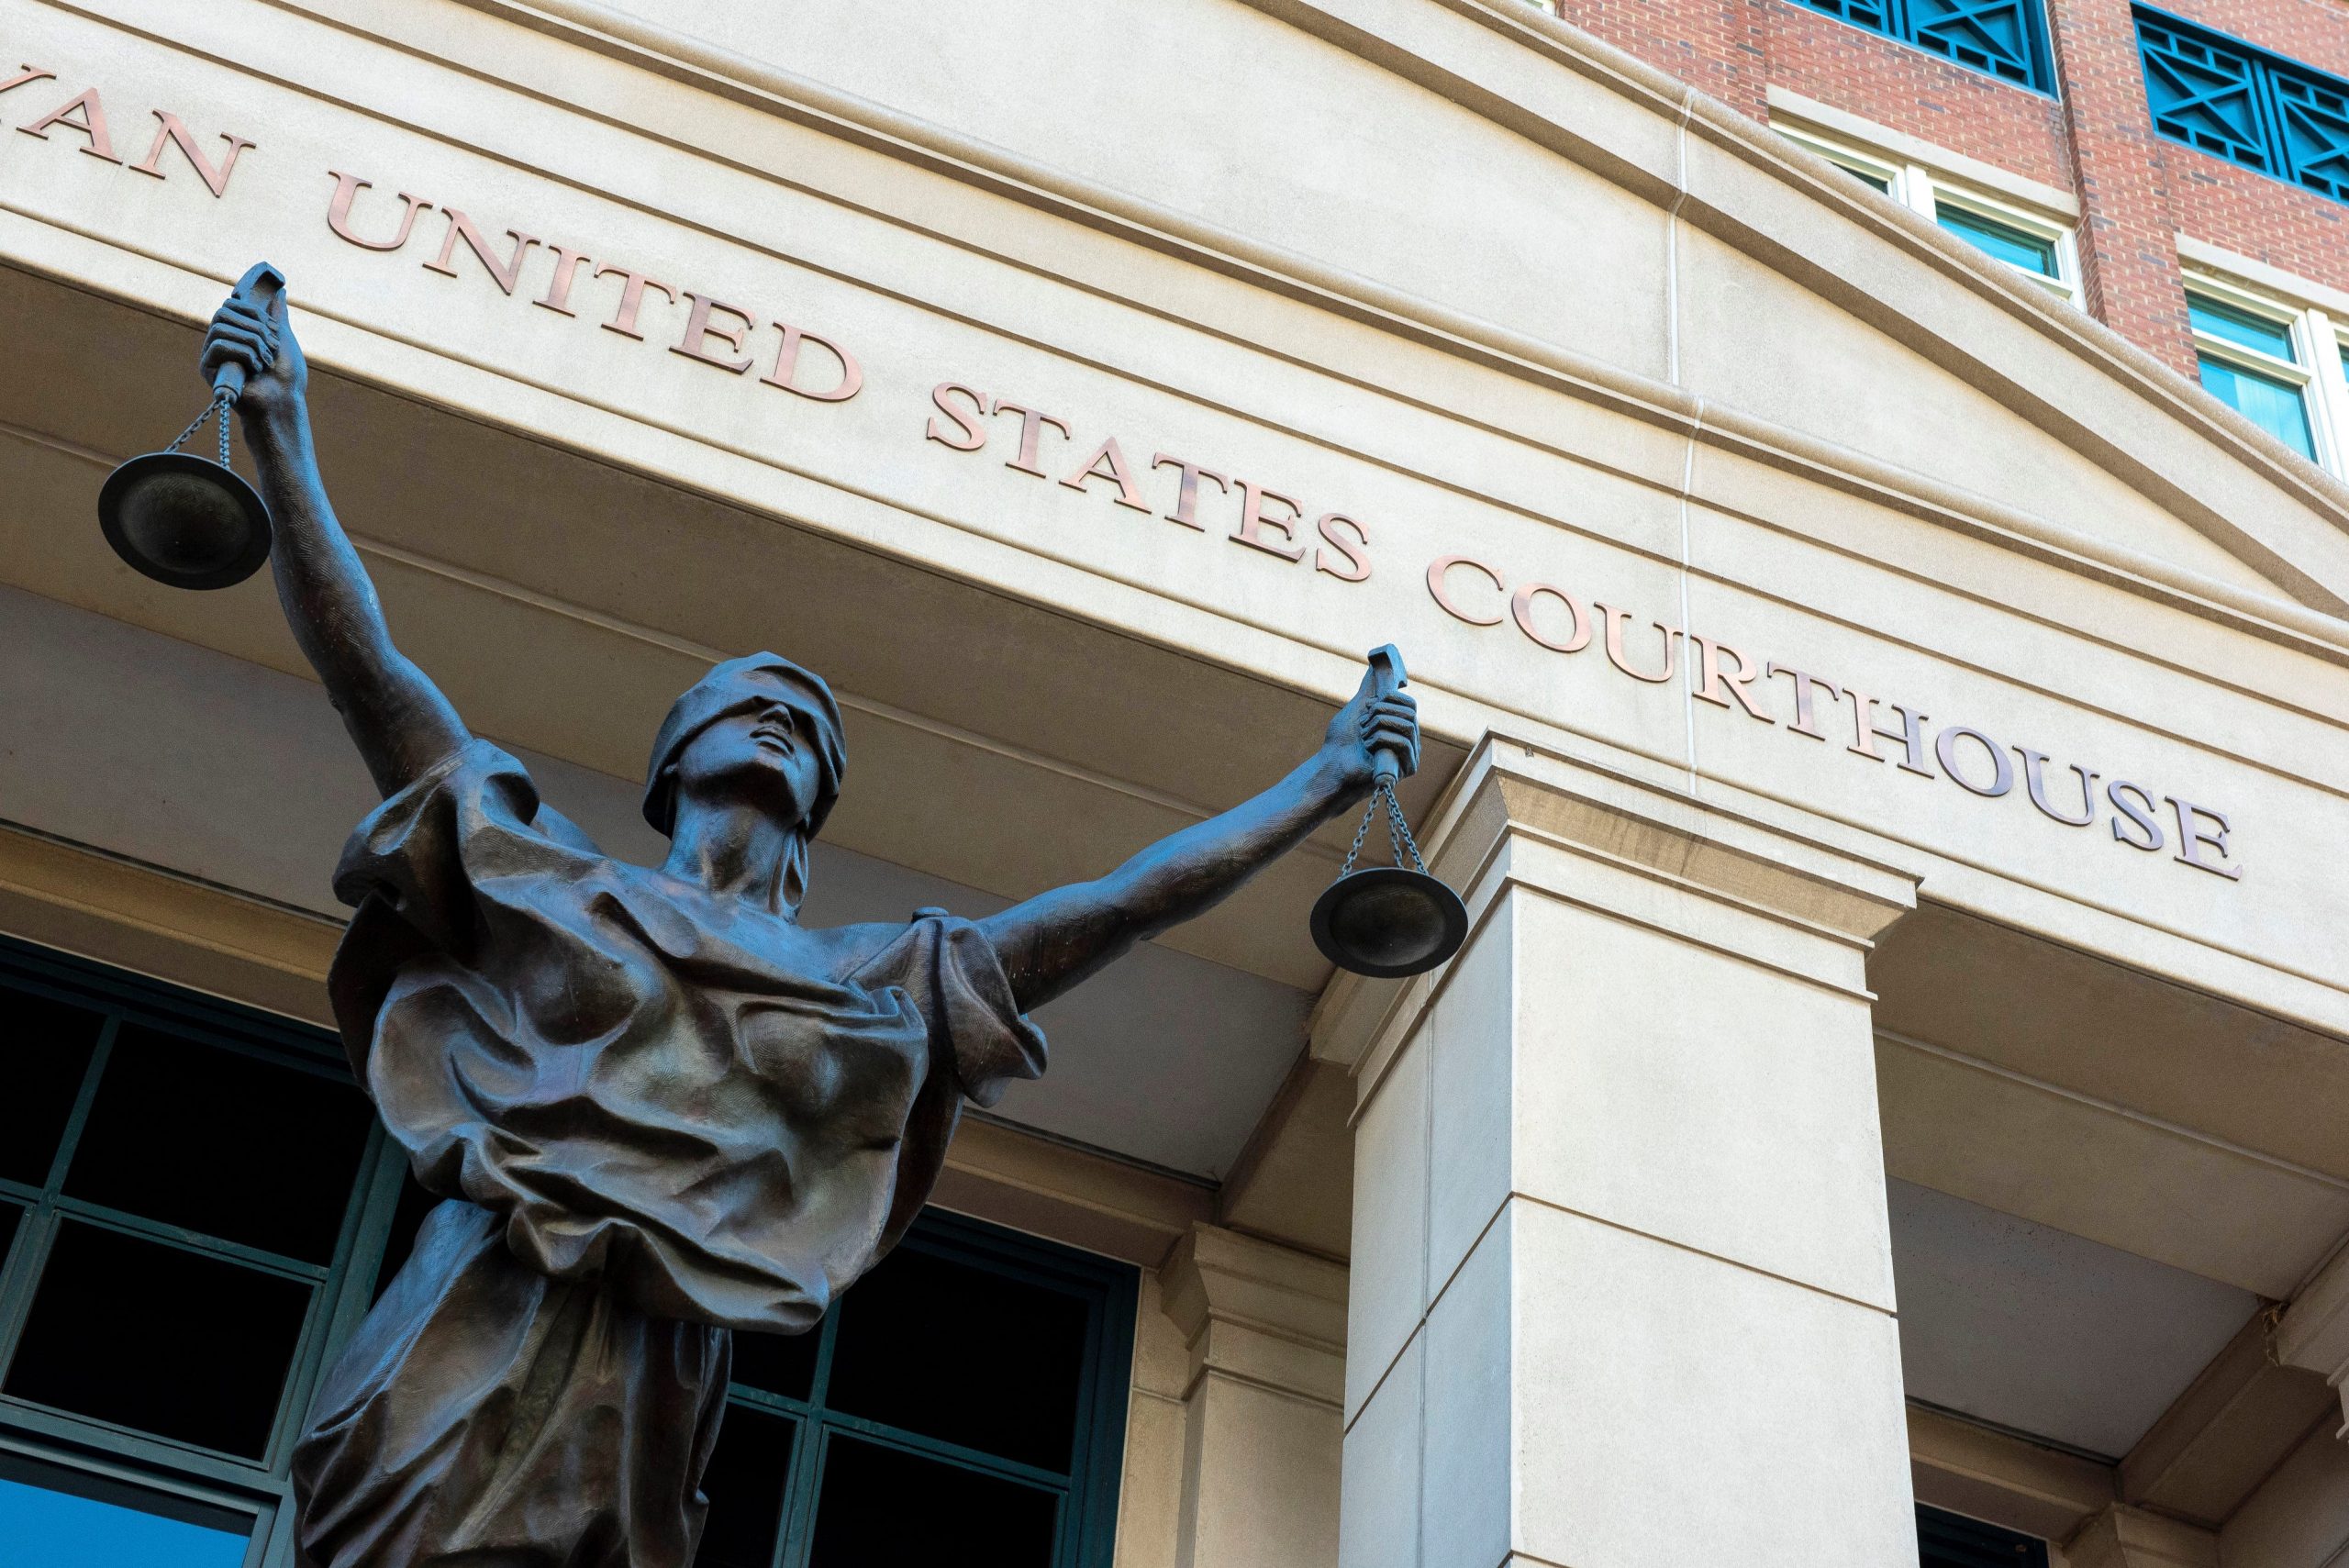 A statue of blind justice in front of a US District Courthouse